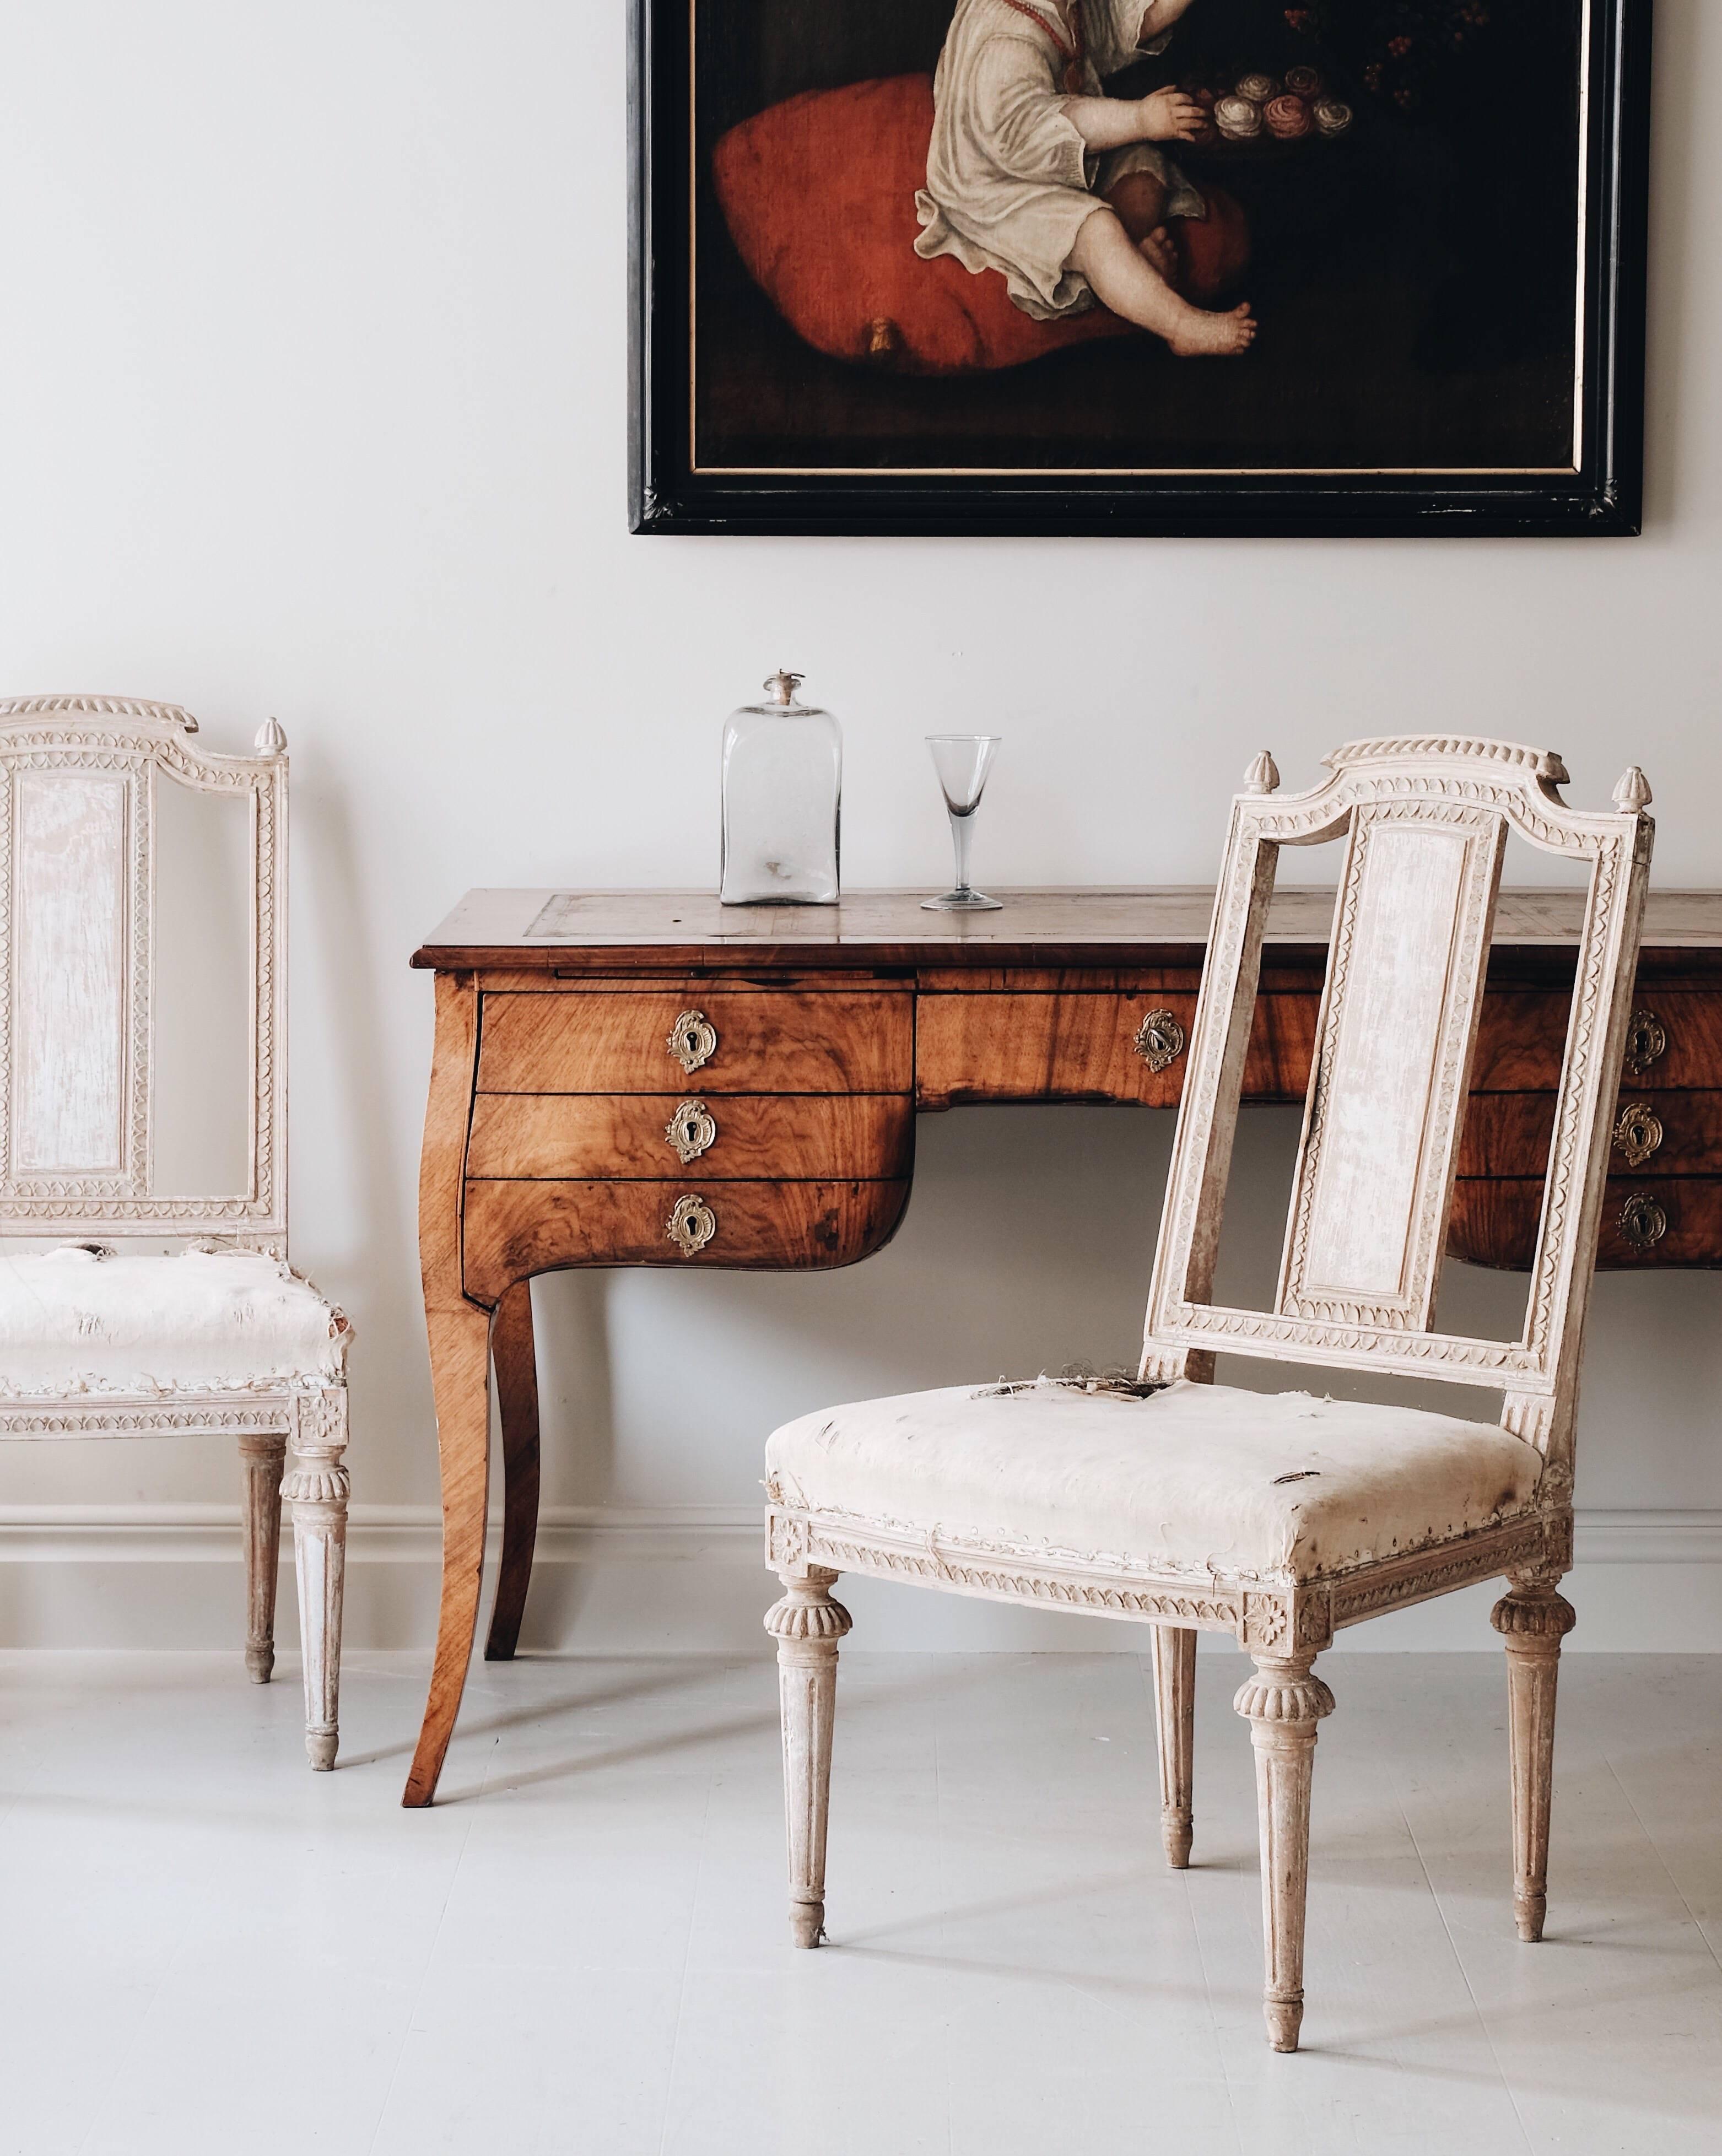 Fine and most unusual pair of 18th century Gustavian armchairs with its original padding left and in original color. Great carvings and proportions, circa 1790, Stockholm, Sweden.

Upholster it yourself or let us do it in a washed natural raw